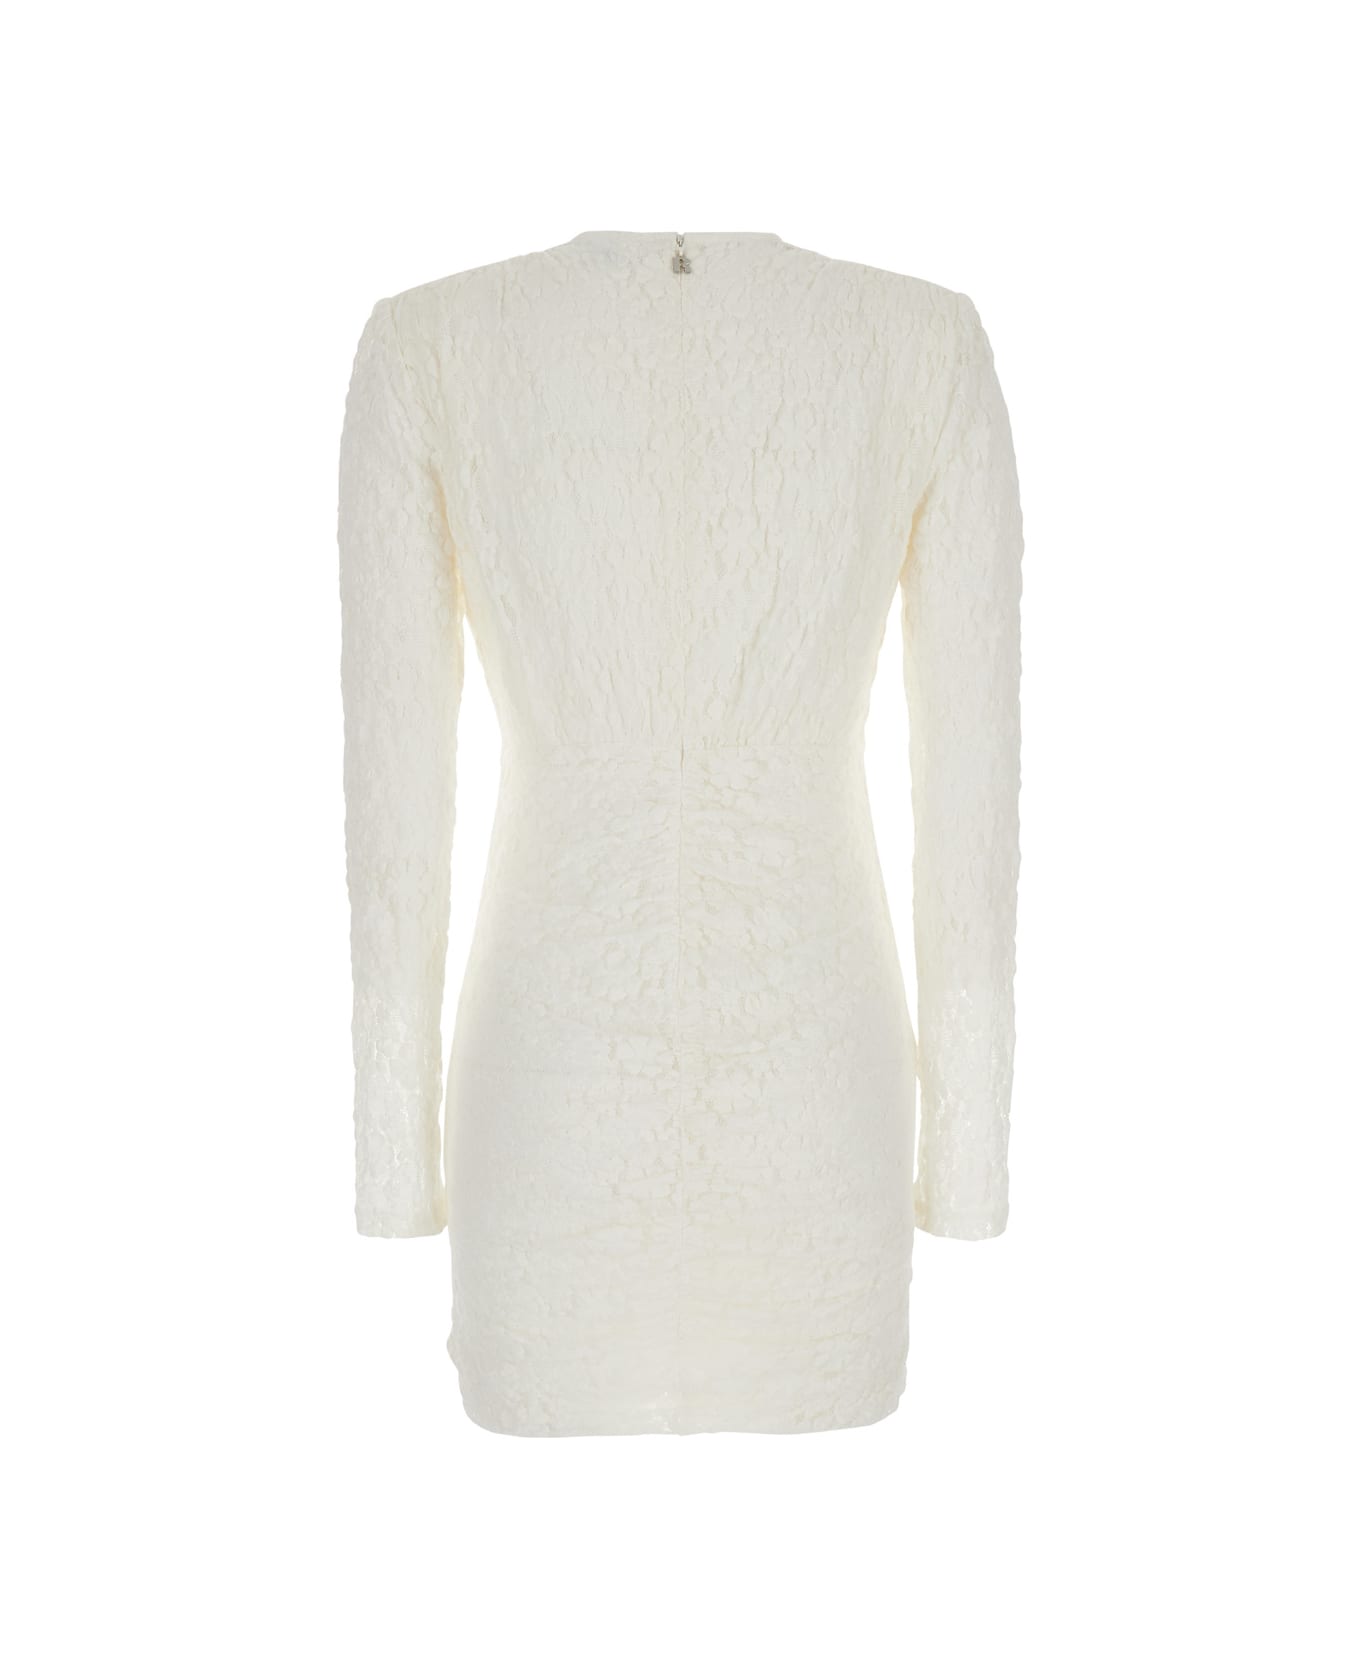 Rotate by Birger Christensen Mini White Dress With Rose Patch In Lace Woman - White ワンピース＆ドレス